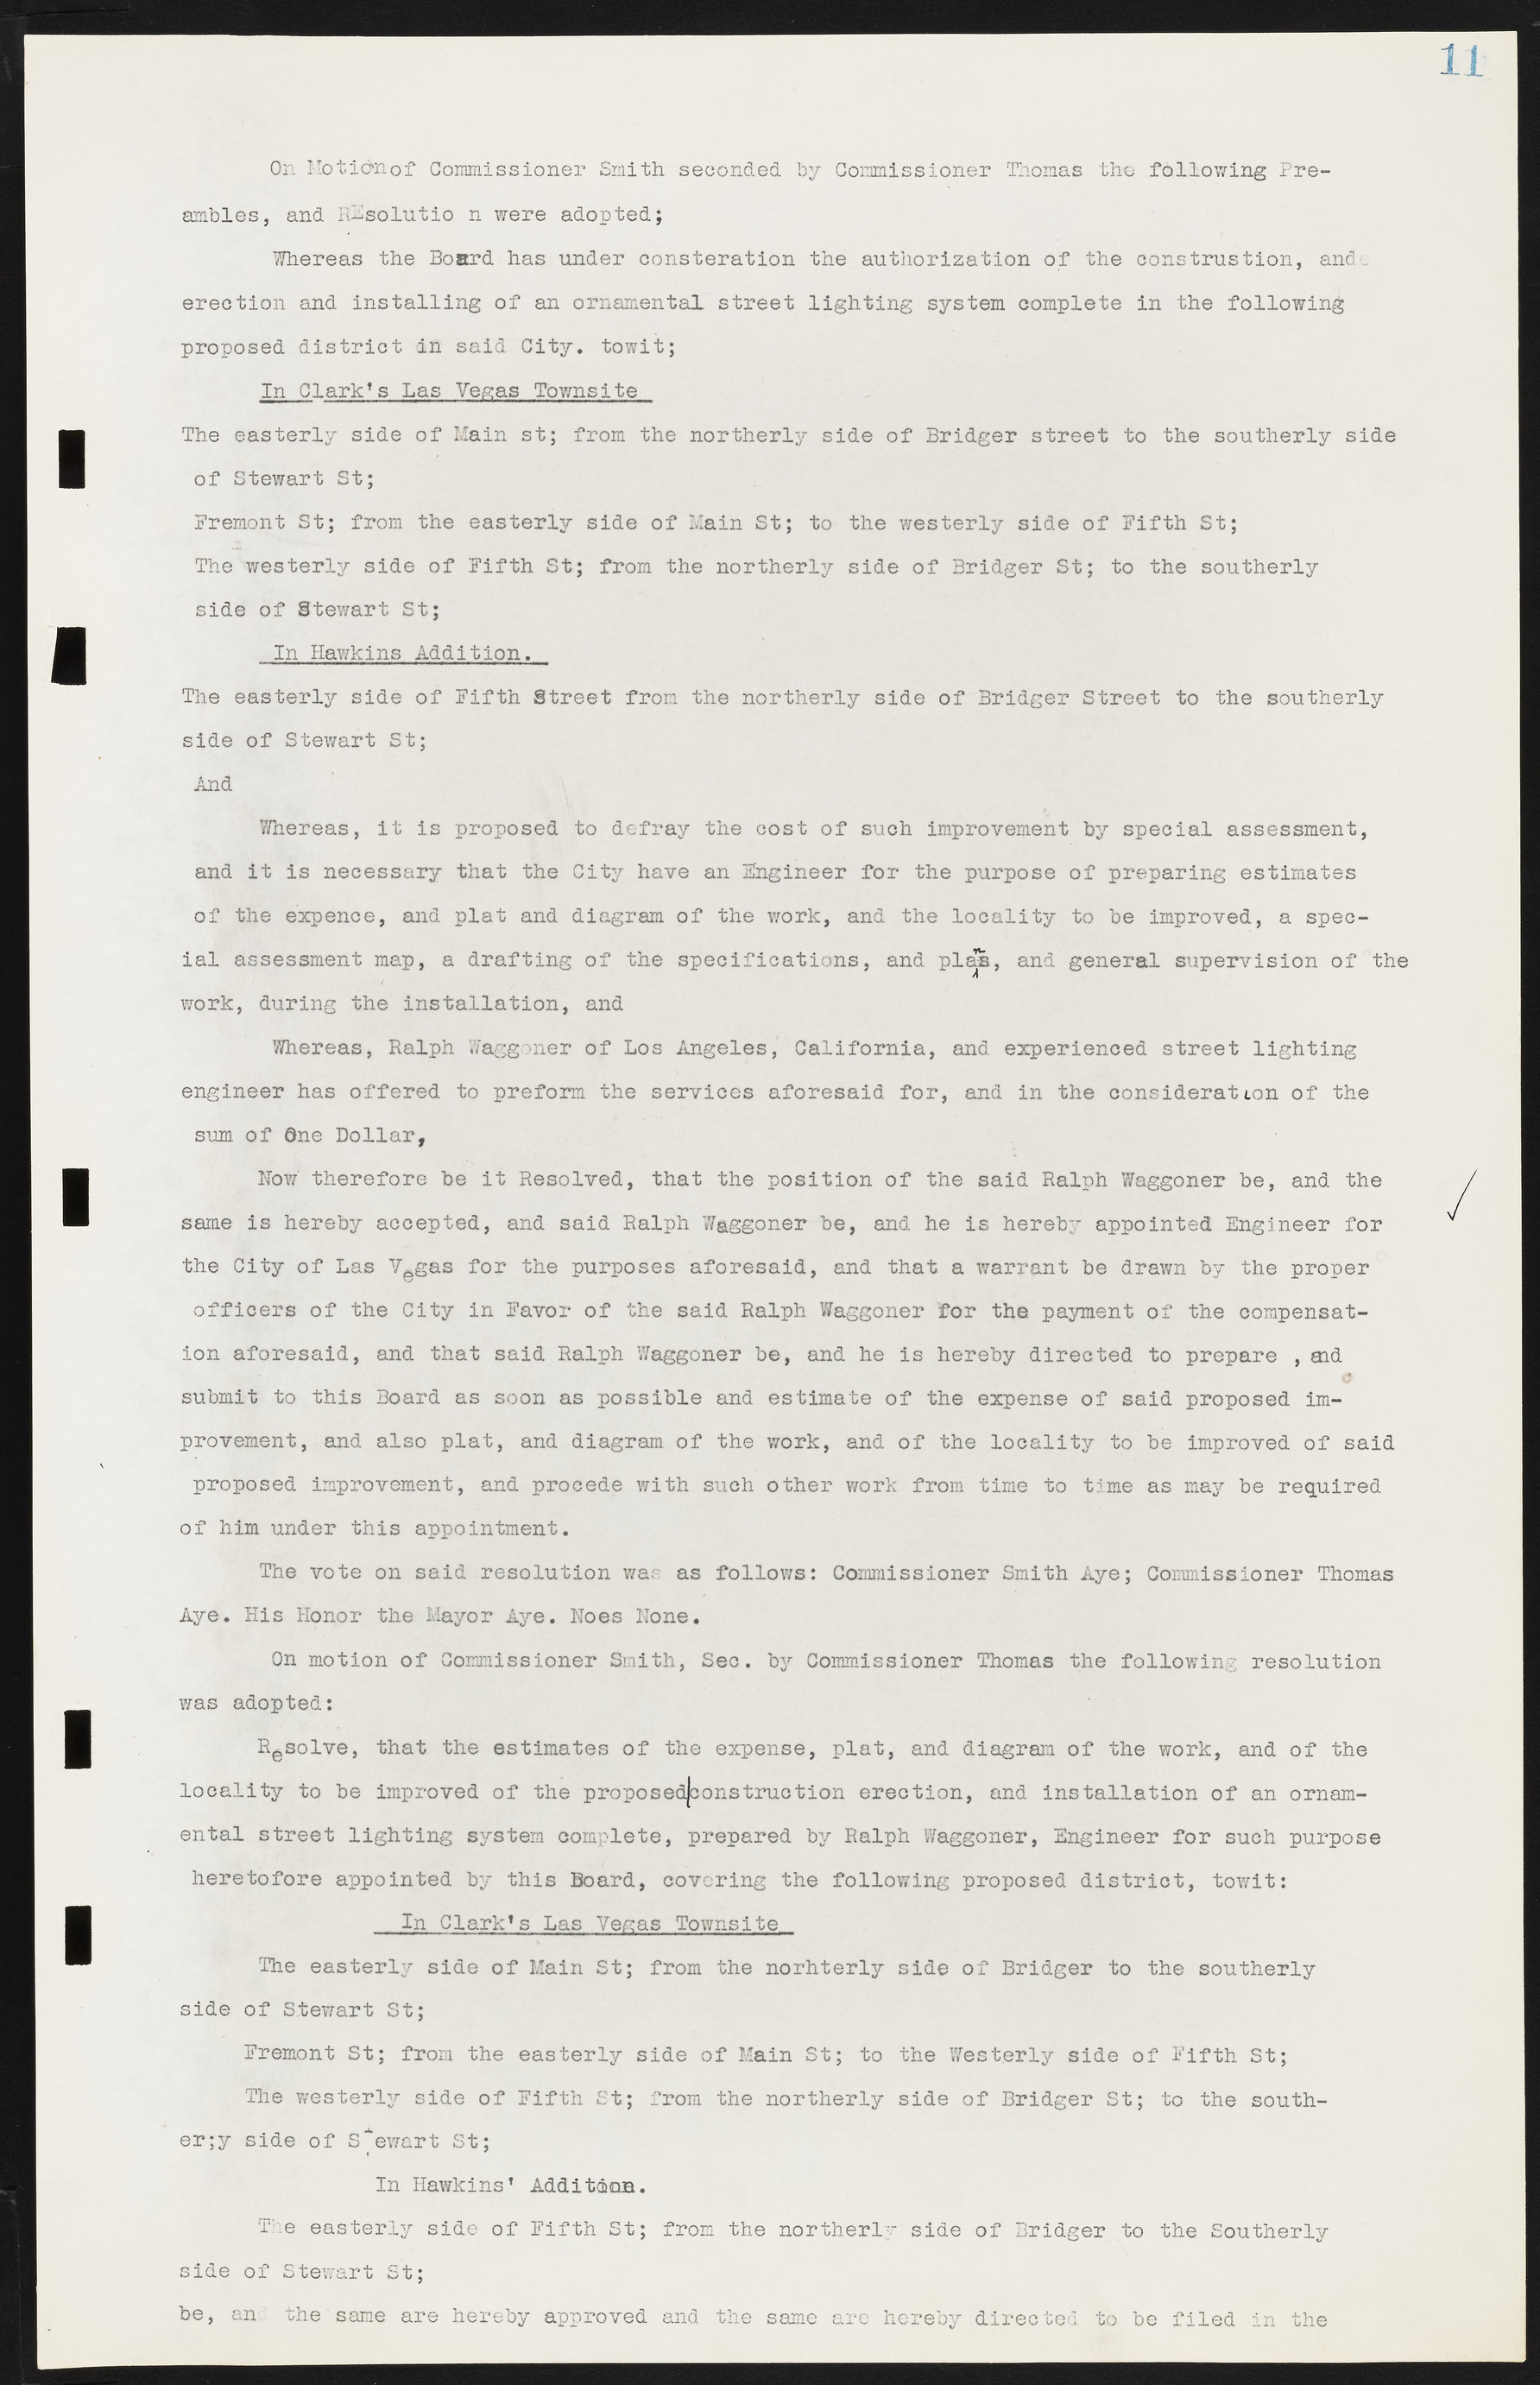 Las Vegas City Commission Minutes, May 14, 1929 to February 11, 1937, lvc000003-17